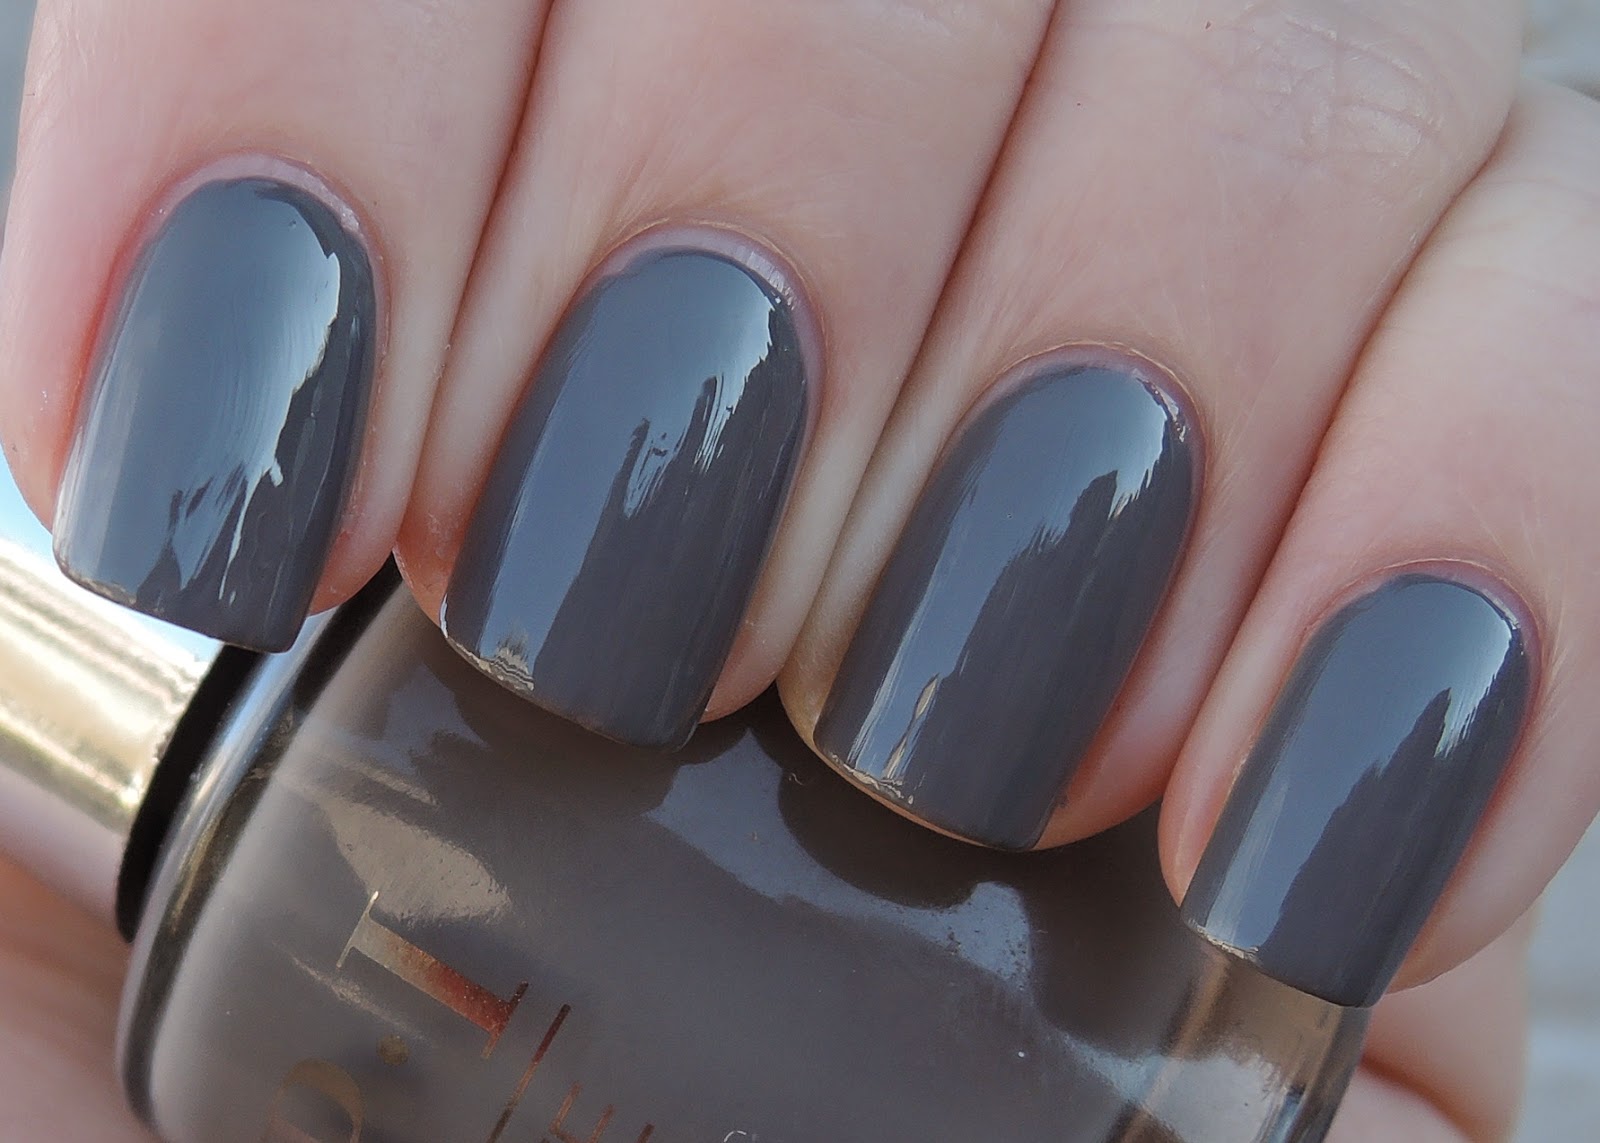 8. OPI Nail Lacquer in "Steel Waters Run Deep" - wide 1